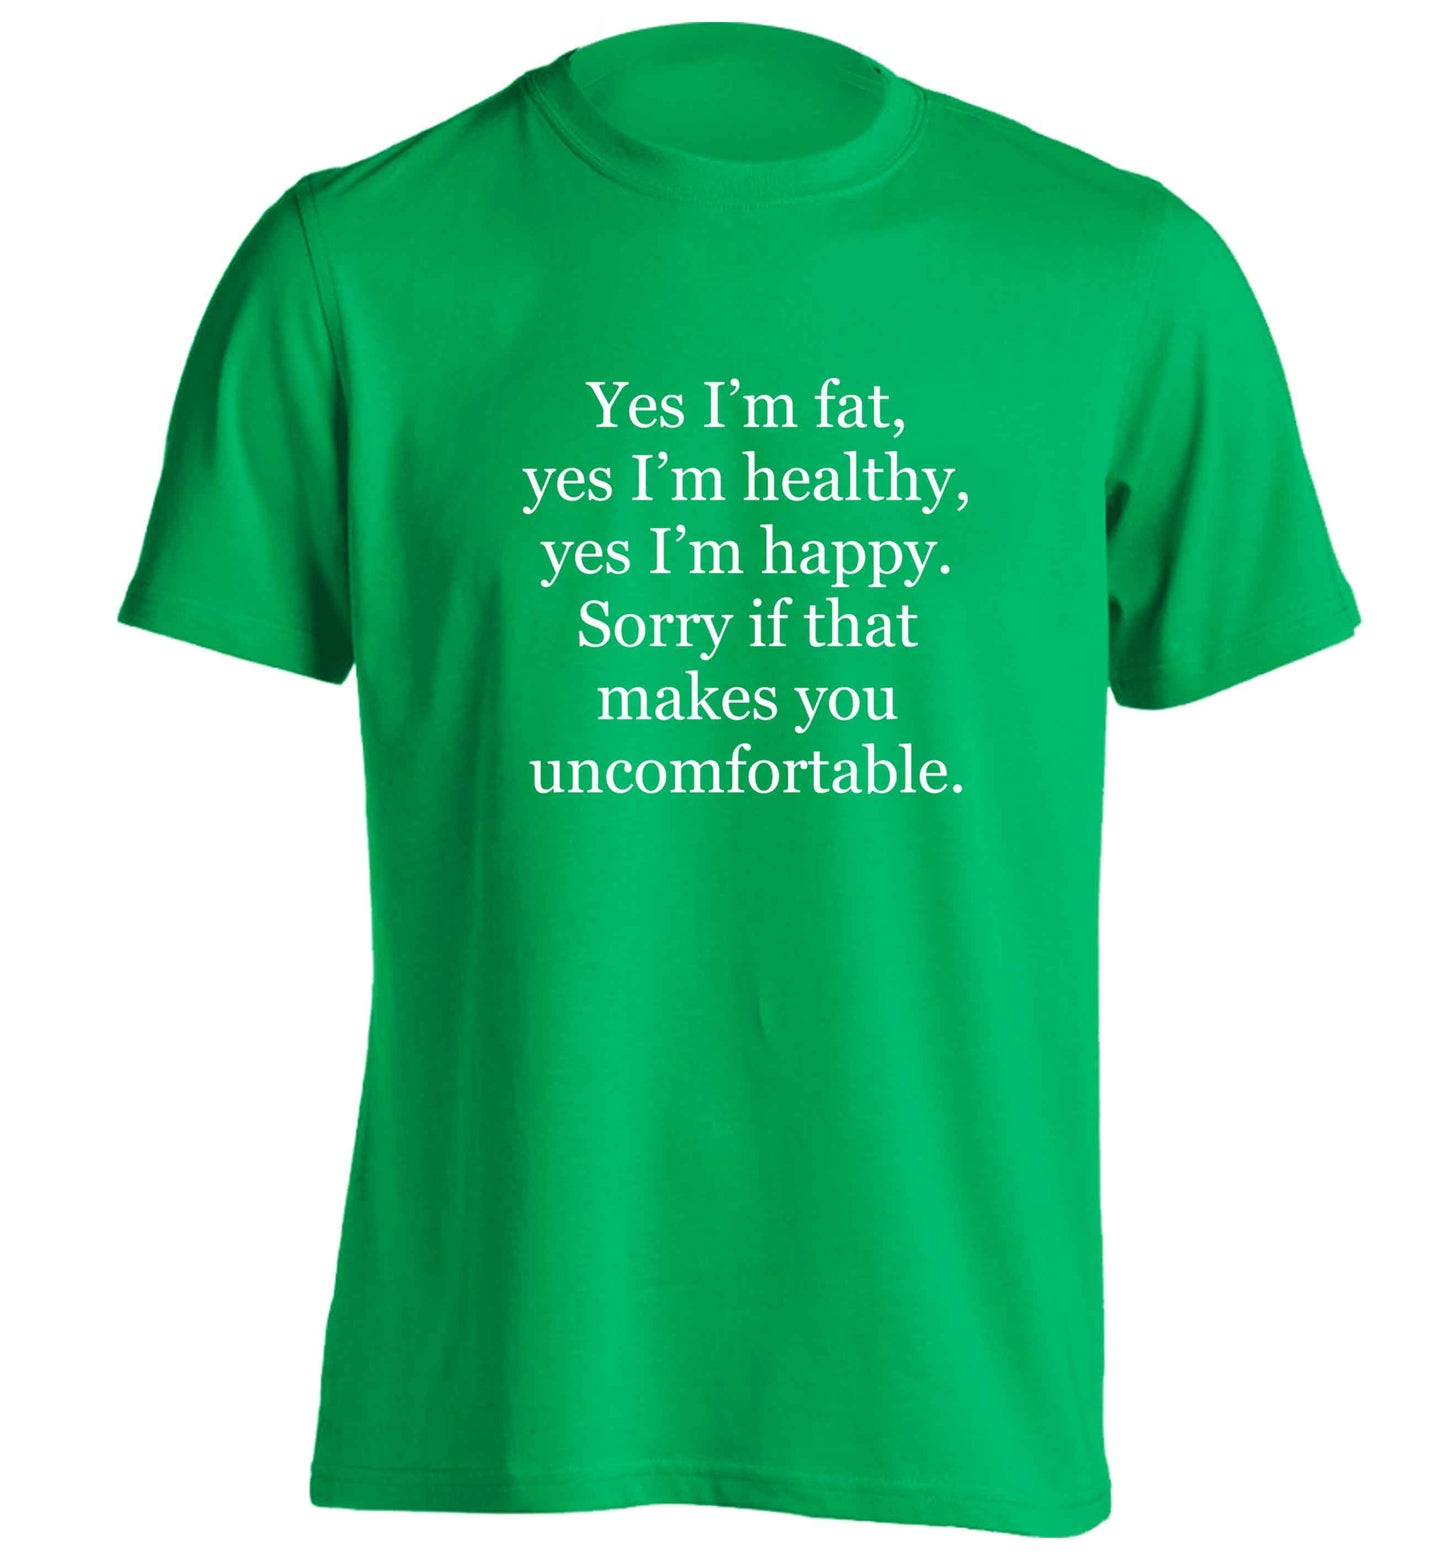 Yes I'm fat, yes I'm healthy, yes I'm happy. Sorry if that makes you uncomfortable adults unisex green Tshirt 2XL